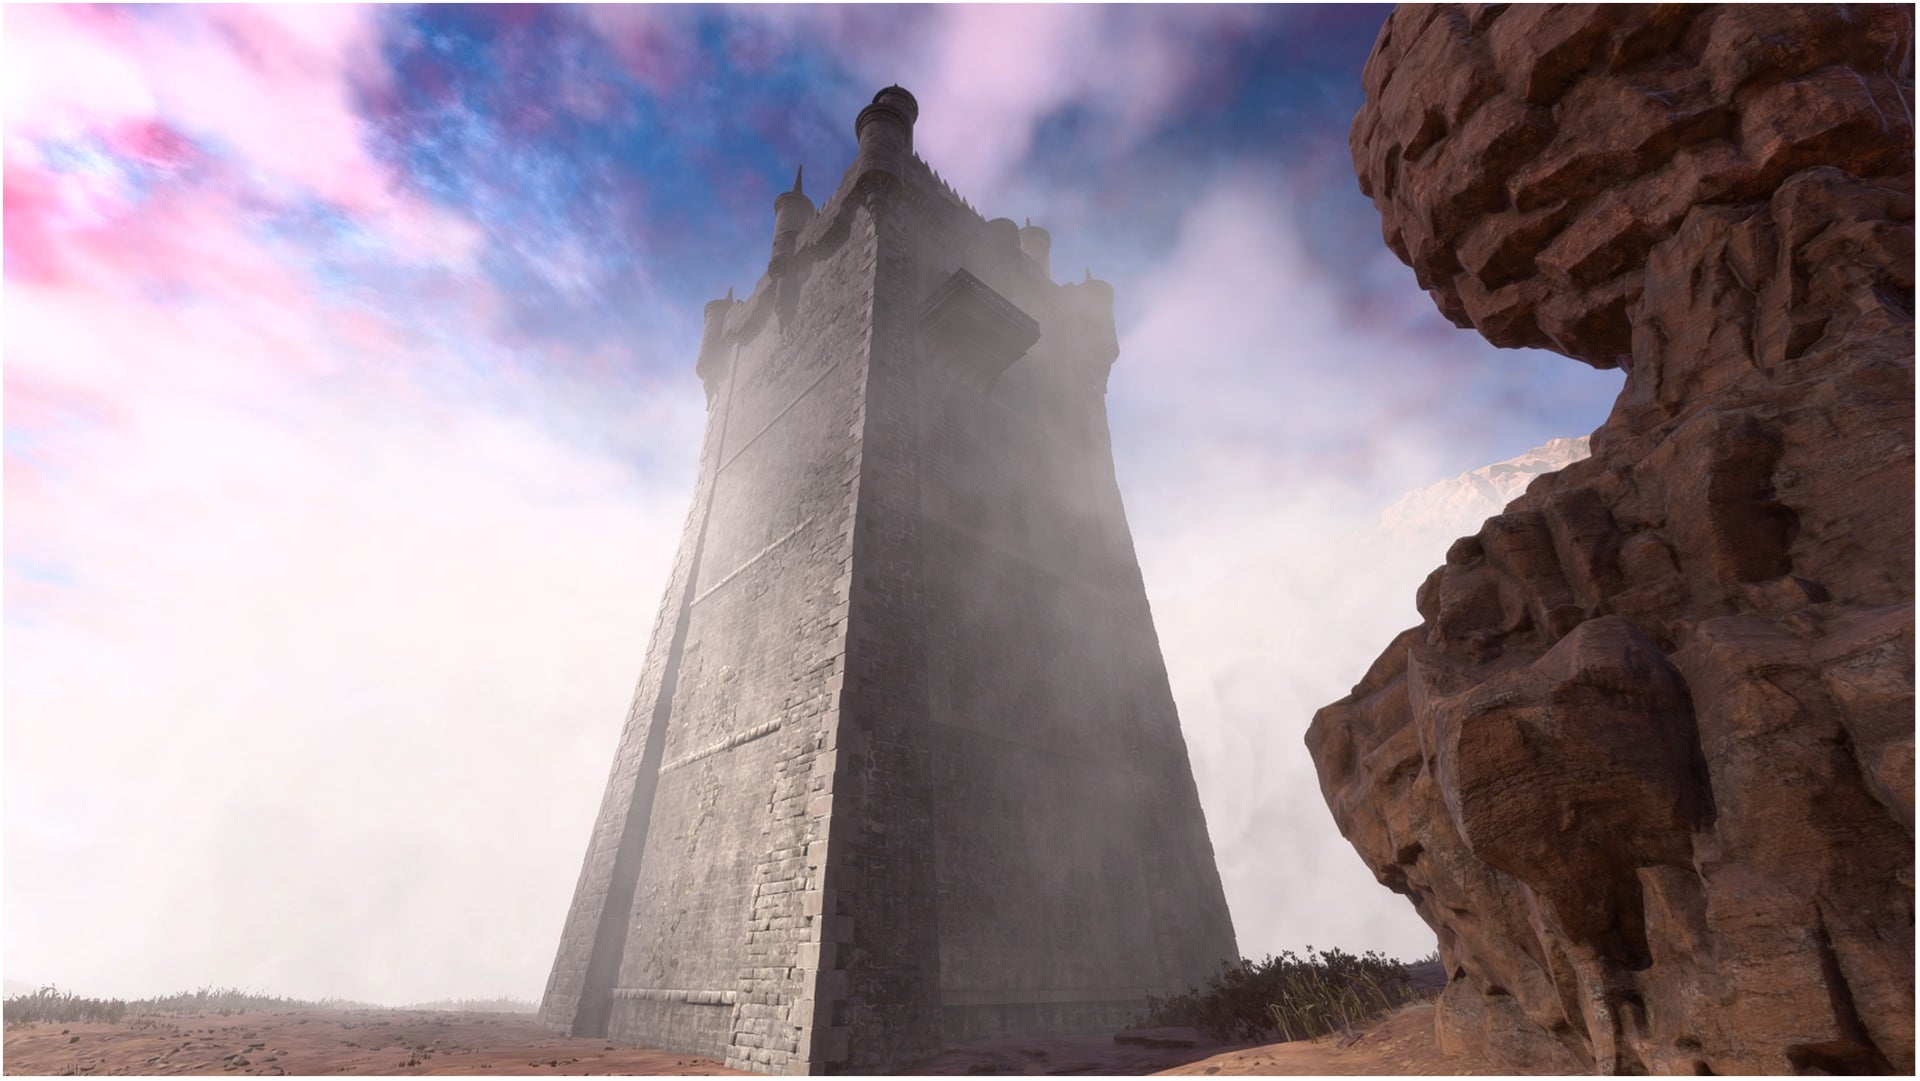 Forspoken, the exterior of the Kloros Guild tower